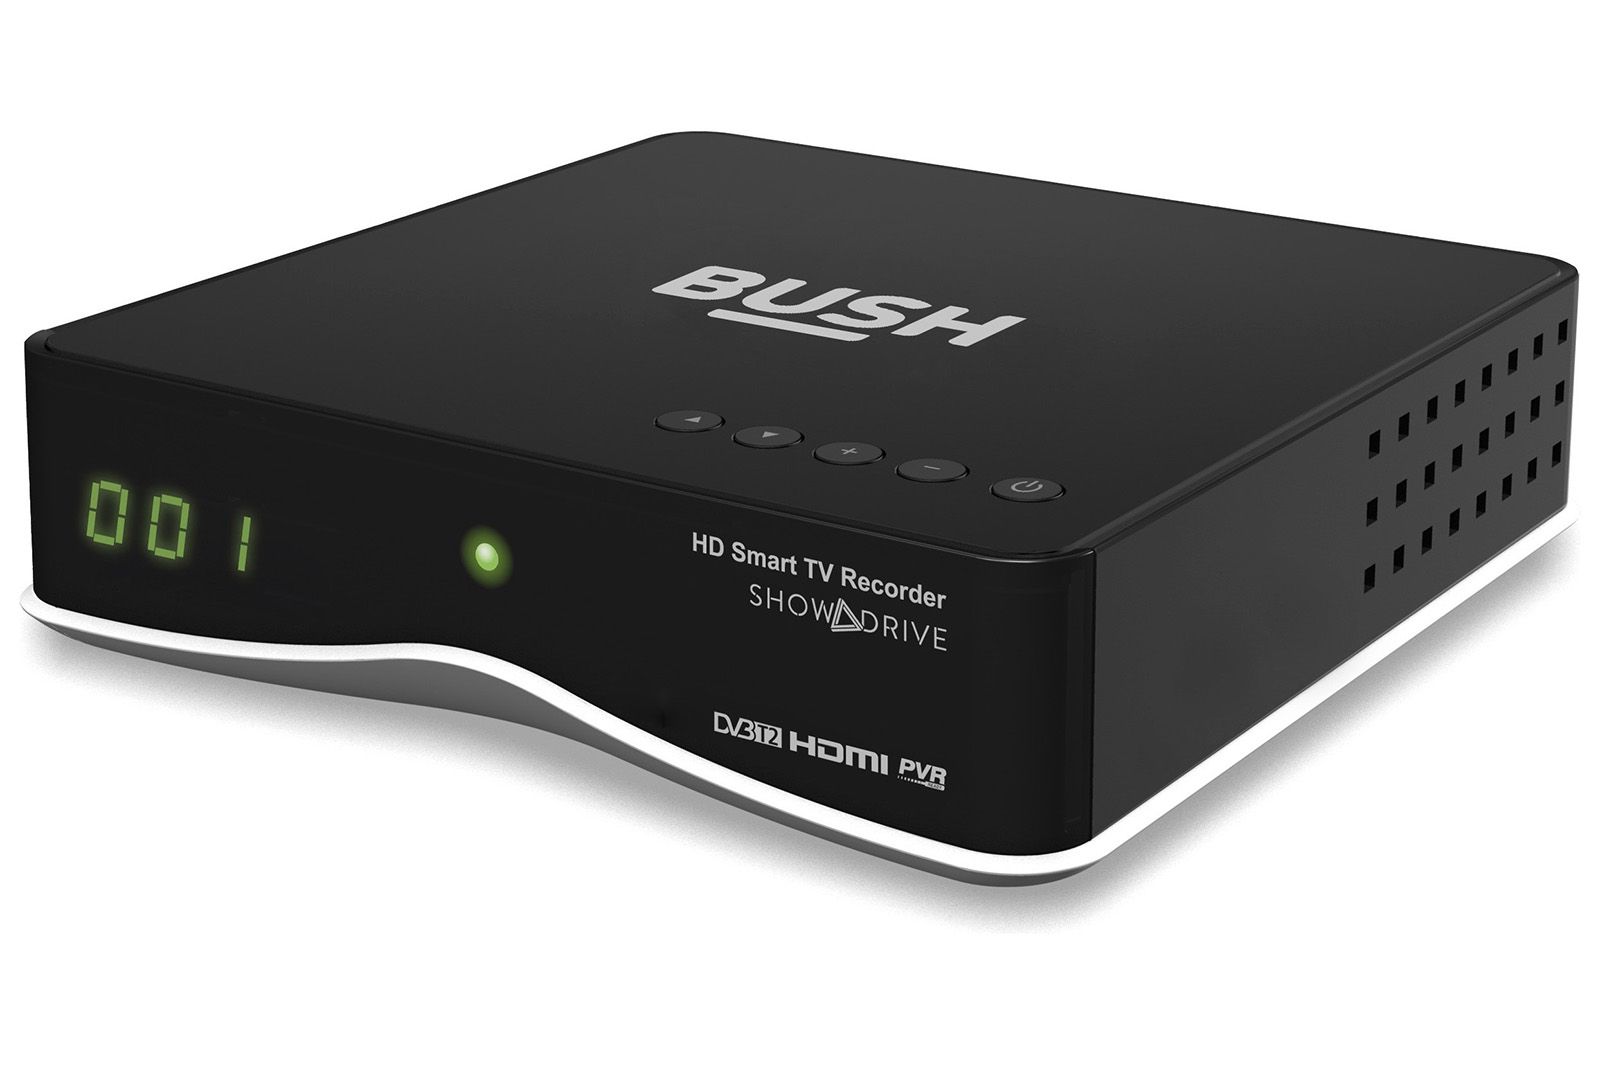 bush digital tv recorder has fluid viewing style features without needing sky q image 1